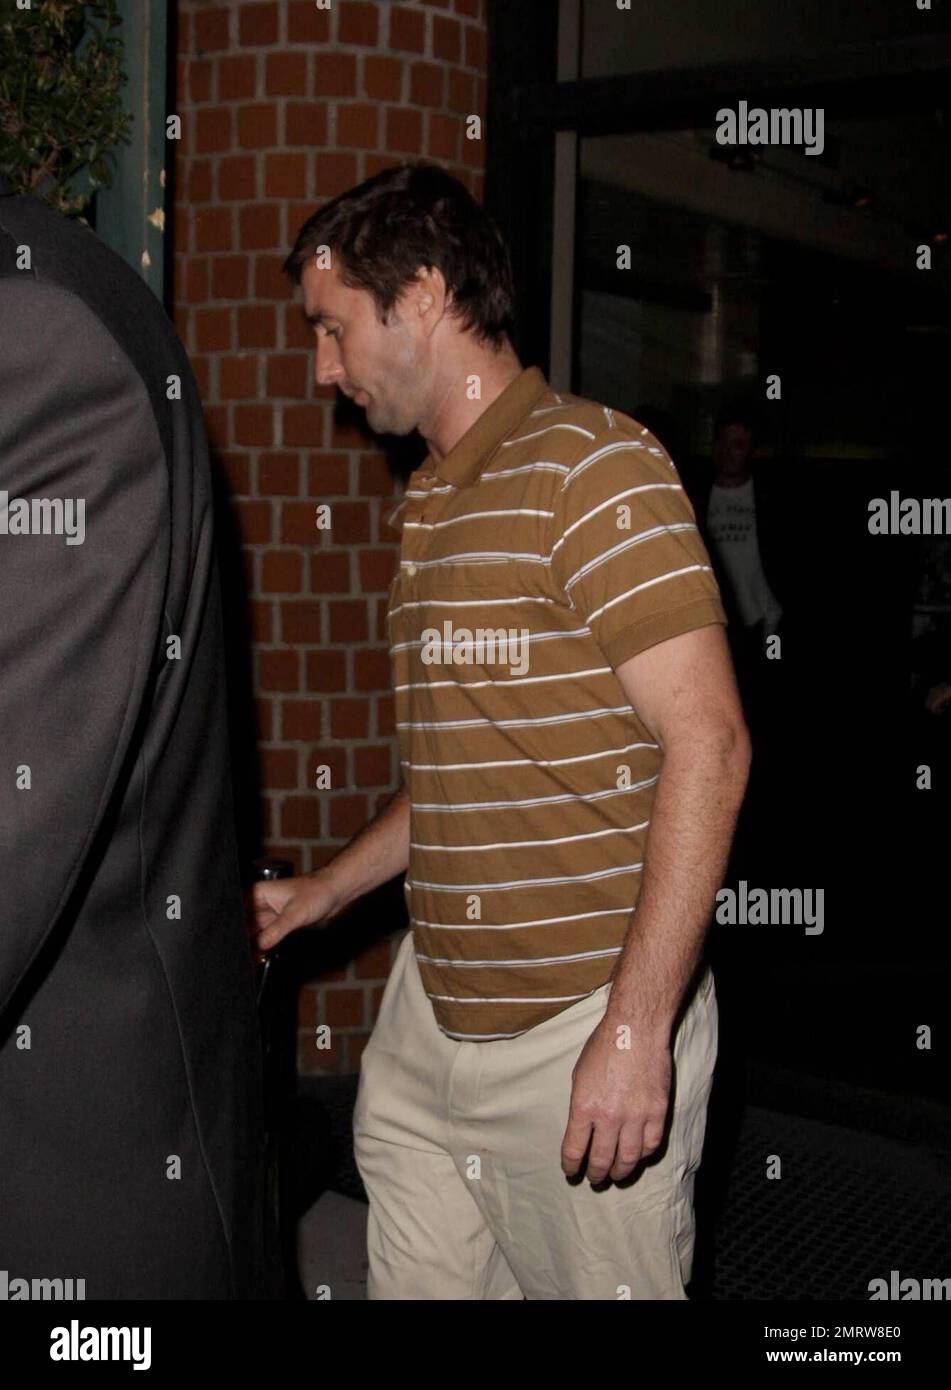 Luke Wilson leaves the restaurant Mr. Chow after having dinner and sitting for a bit with Steve Tisch and his daughter. He does his best to keep his head down and completely covers up once in the waiting SUV. Could Luke have been meeting Tisch about being cast in an upcoming film? Los Angeles, CA. 9/24/08. Stock Photo